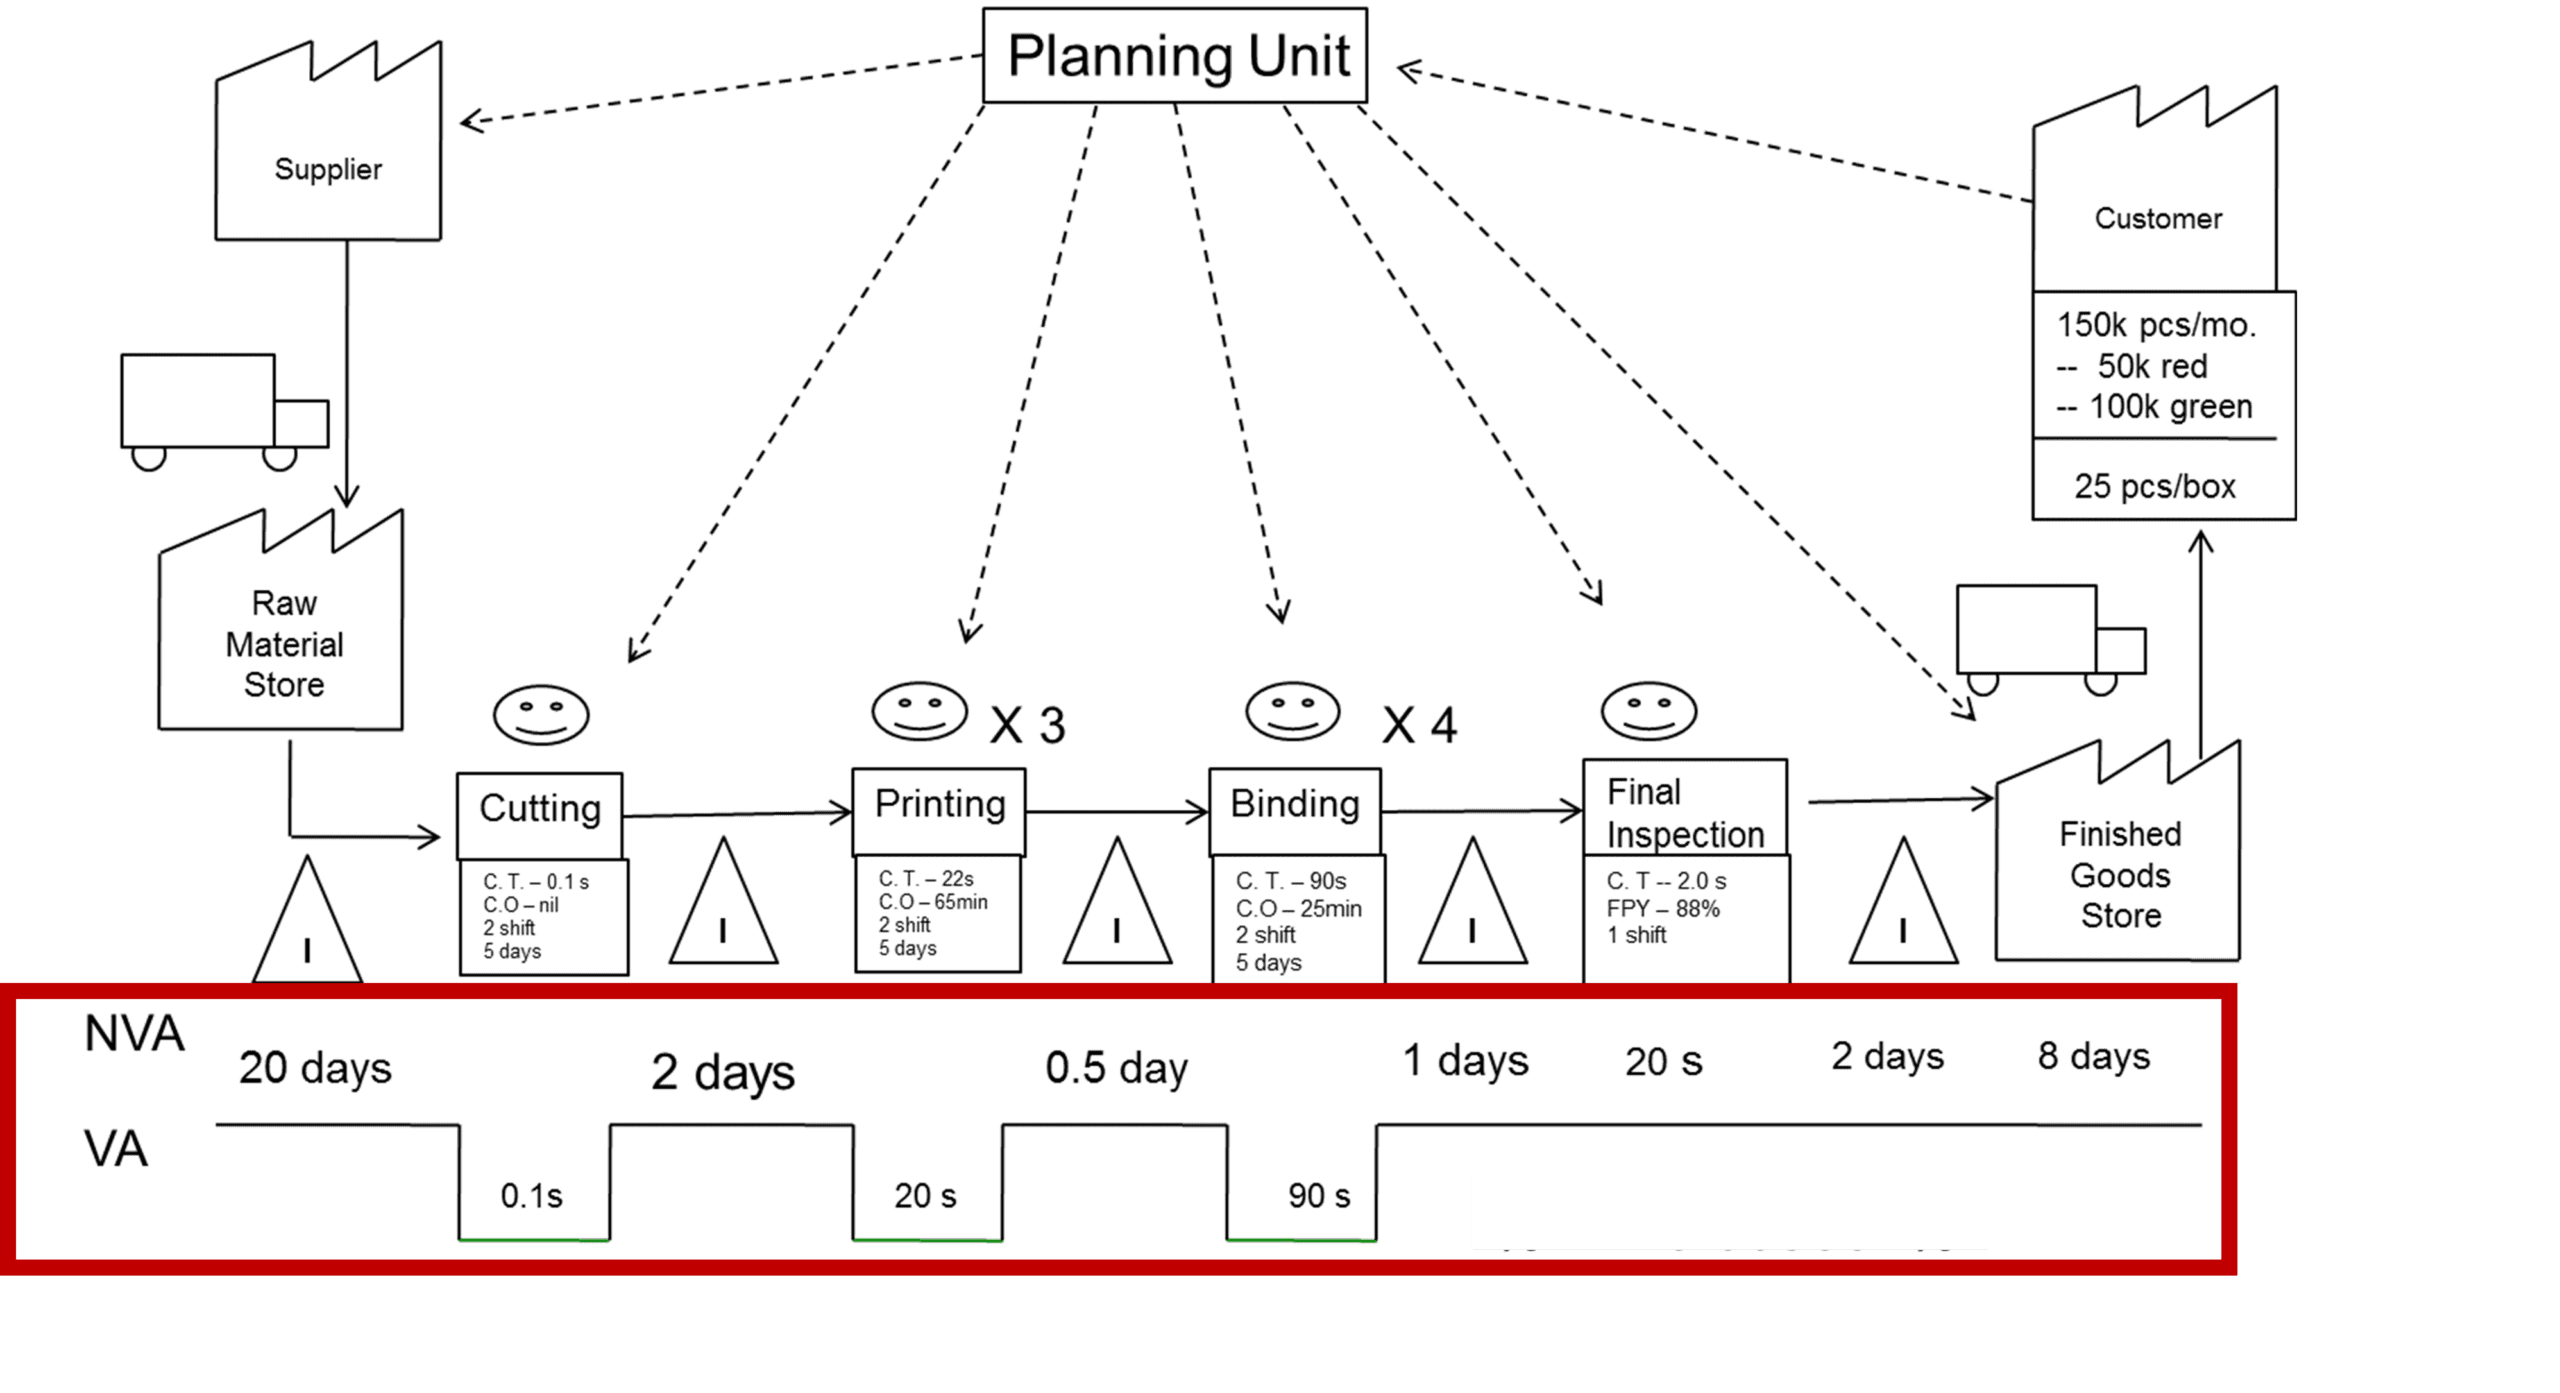 Value Stream Mapping (VSM) Tutorial with Examples & Tips – BMC